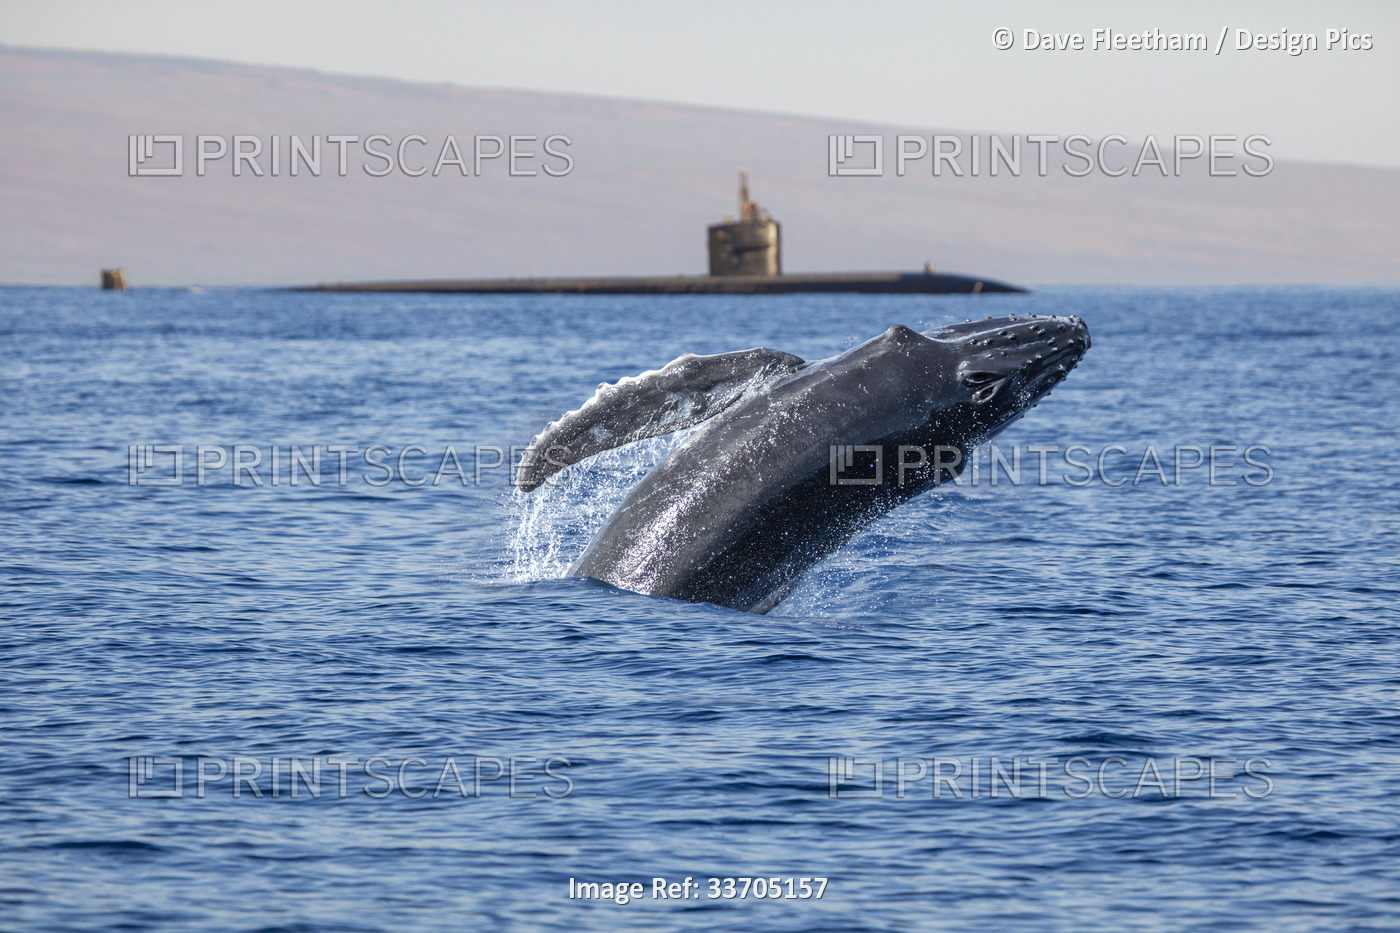 A humpback whale (Megaptera novaeangliae) breaches in front of a US Navy ...